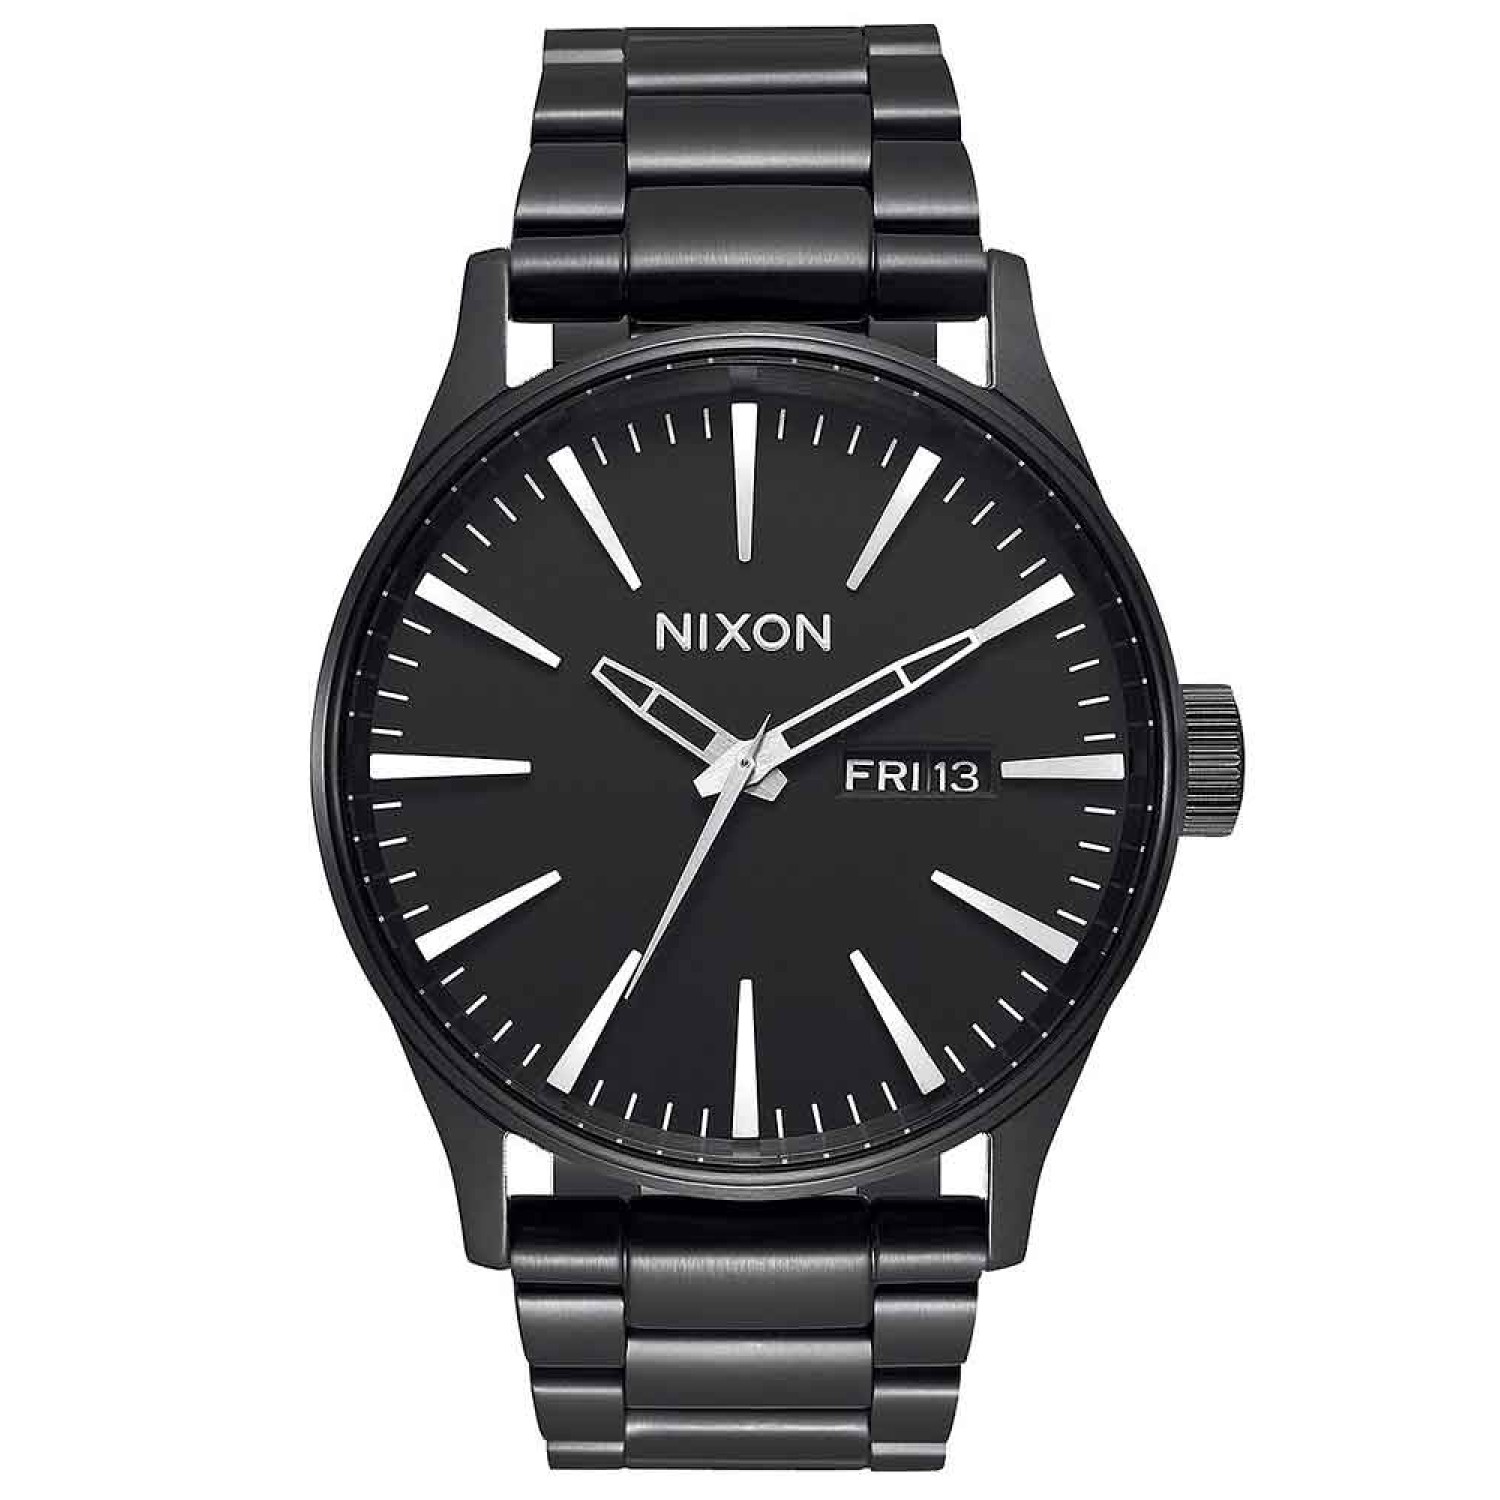 A356001 NIXON Mens SENTRY Black Watch. Nixing the status quo of what you may expect when it comes to classically good-looking timepieces, the Sentry SS has entered the room and raised the bar.2 Year  Guarantee 3 Months No Payments and Interest for Q Card 